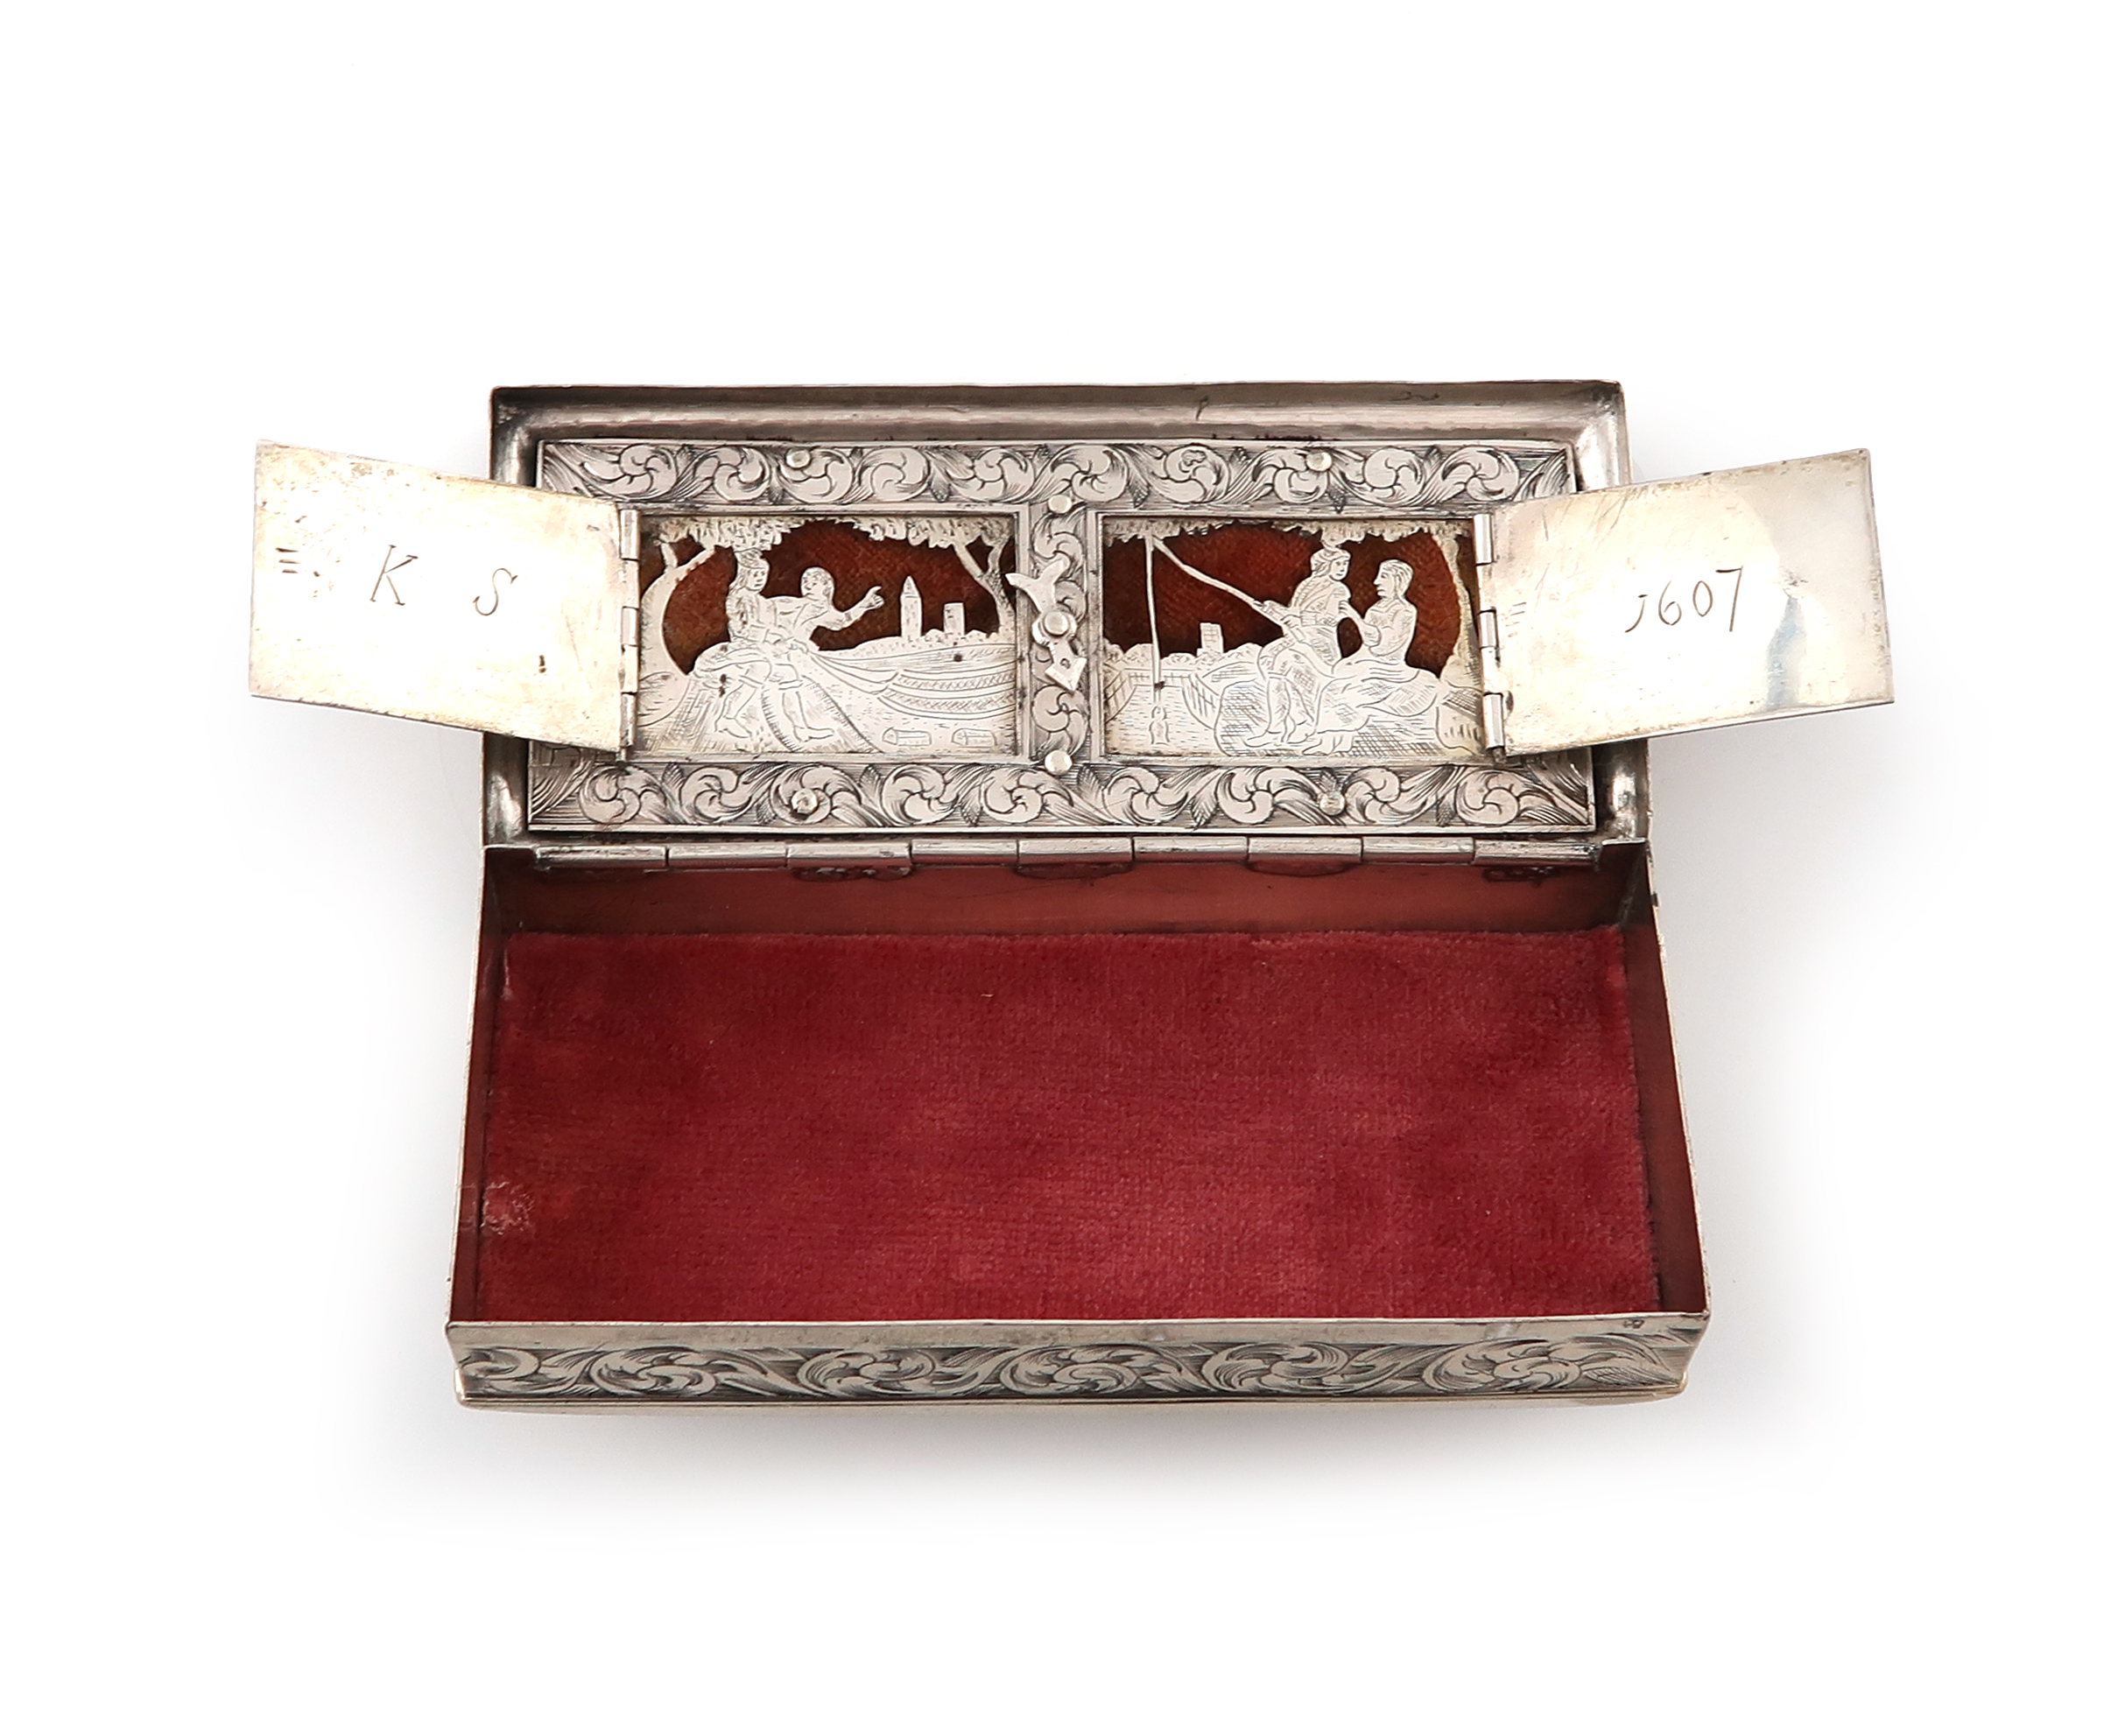 A 19th century Dutch silver tobacco box, by Rinze Jans Spaanstra, in the early 17th century - Image 6 of 6